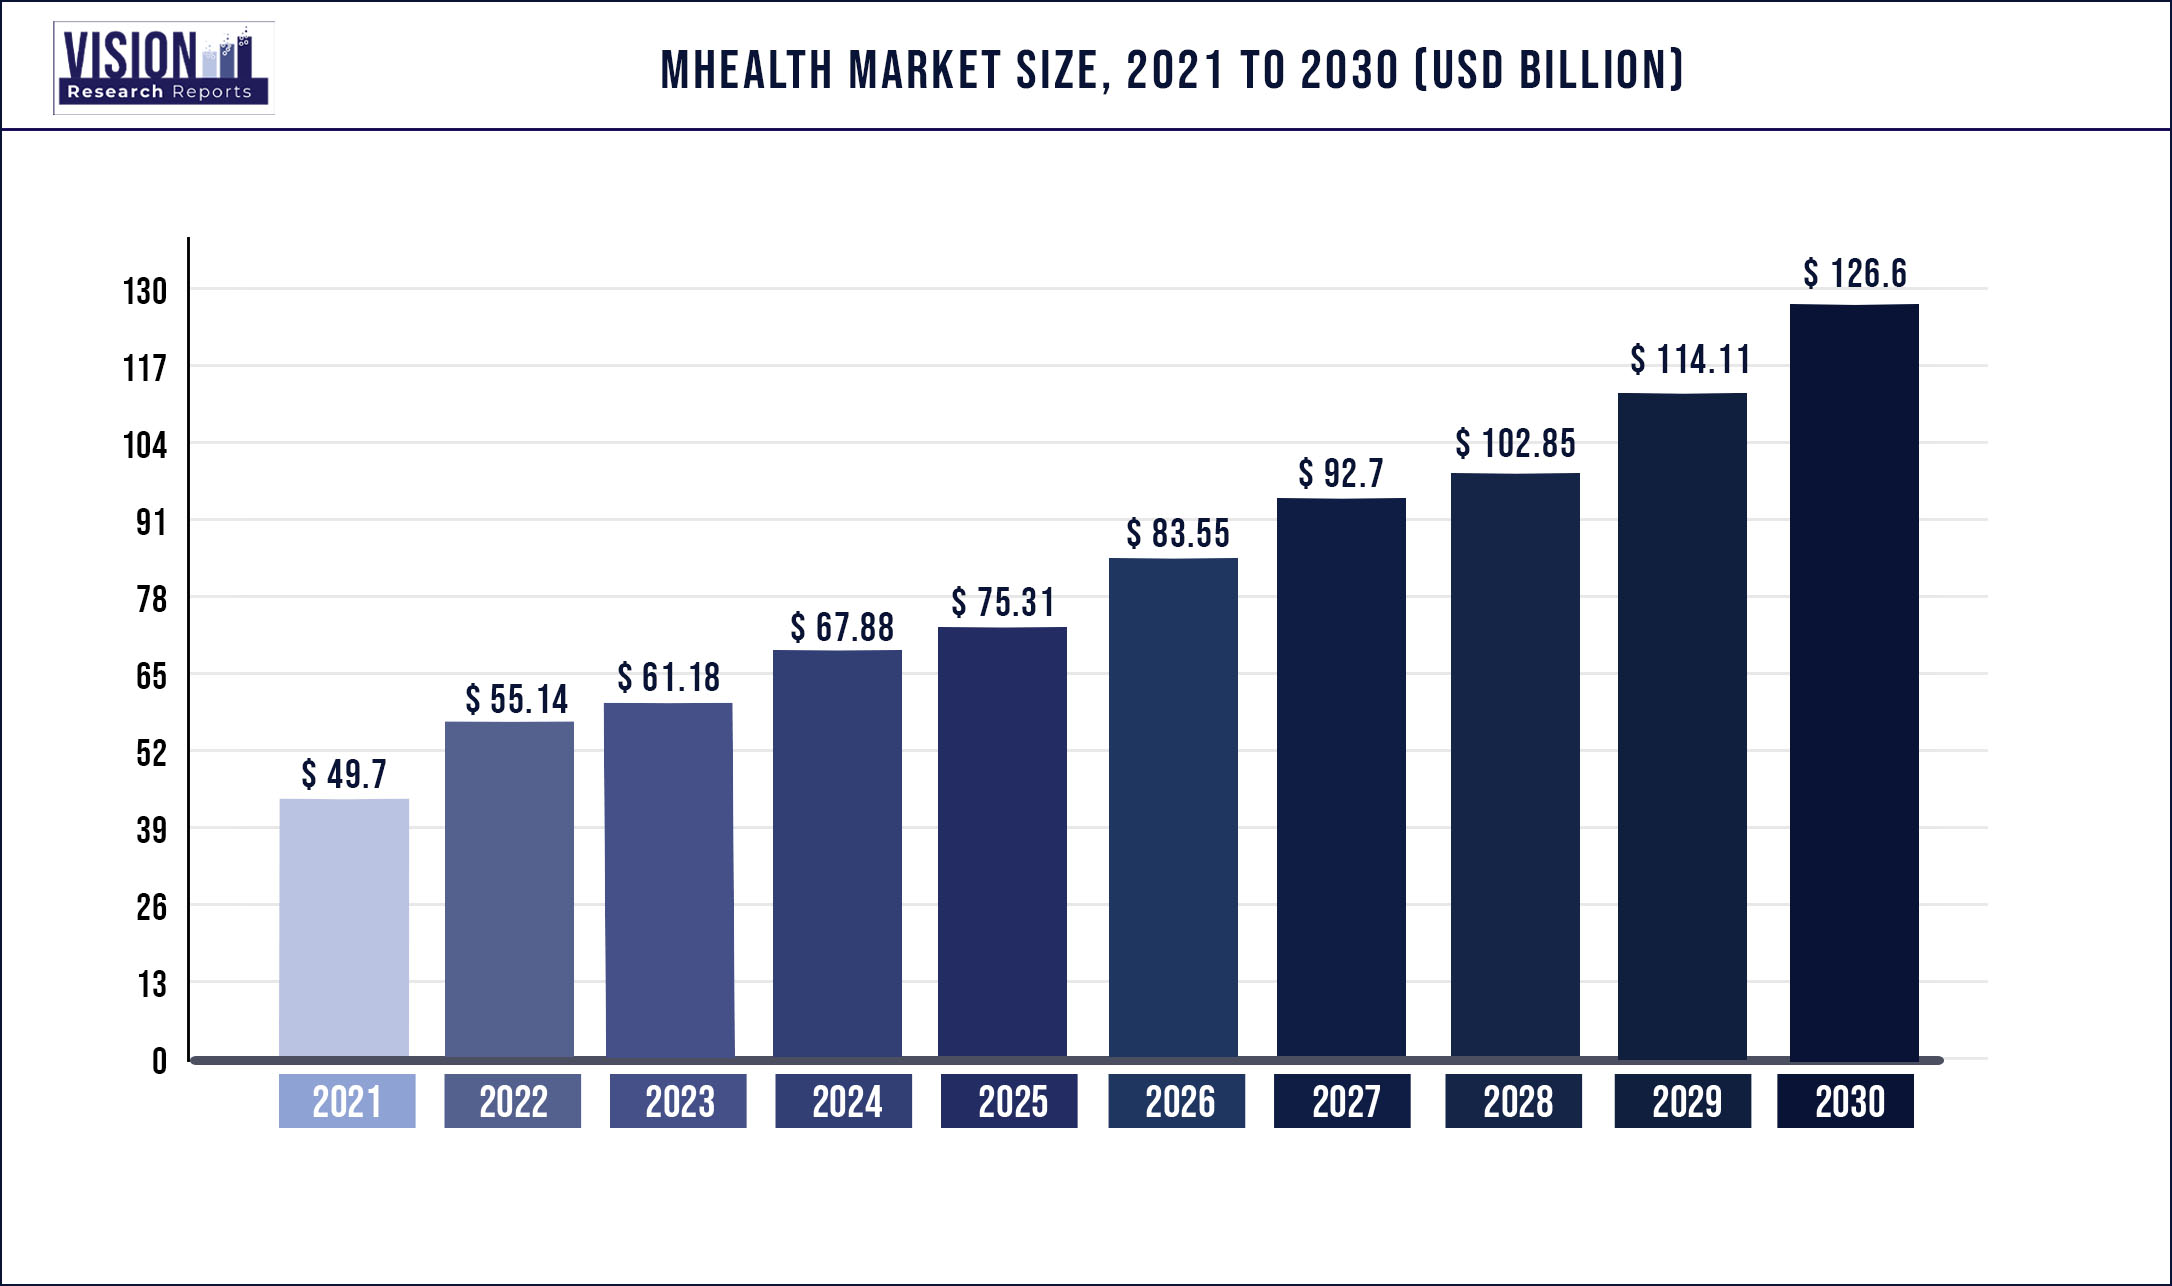 MHealth Market Size 2021 to 2030